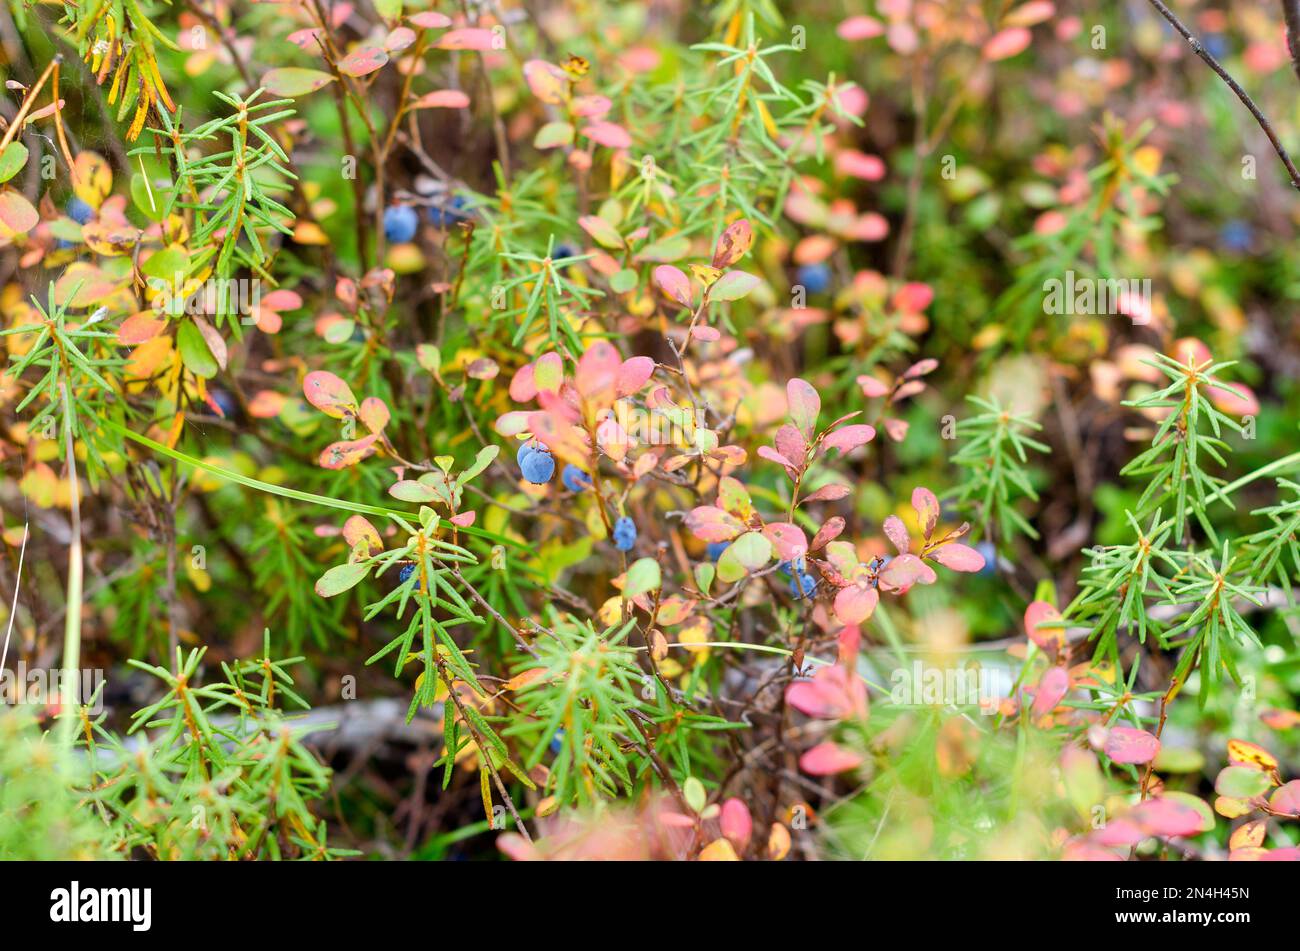 Blue juicy wild northern blueberries grow in colorful vegetation and grass in green and red autumn in the tundra of the Russian forest. Stock Photo